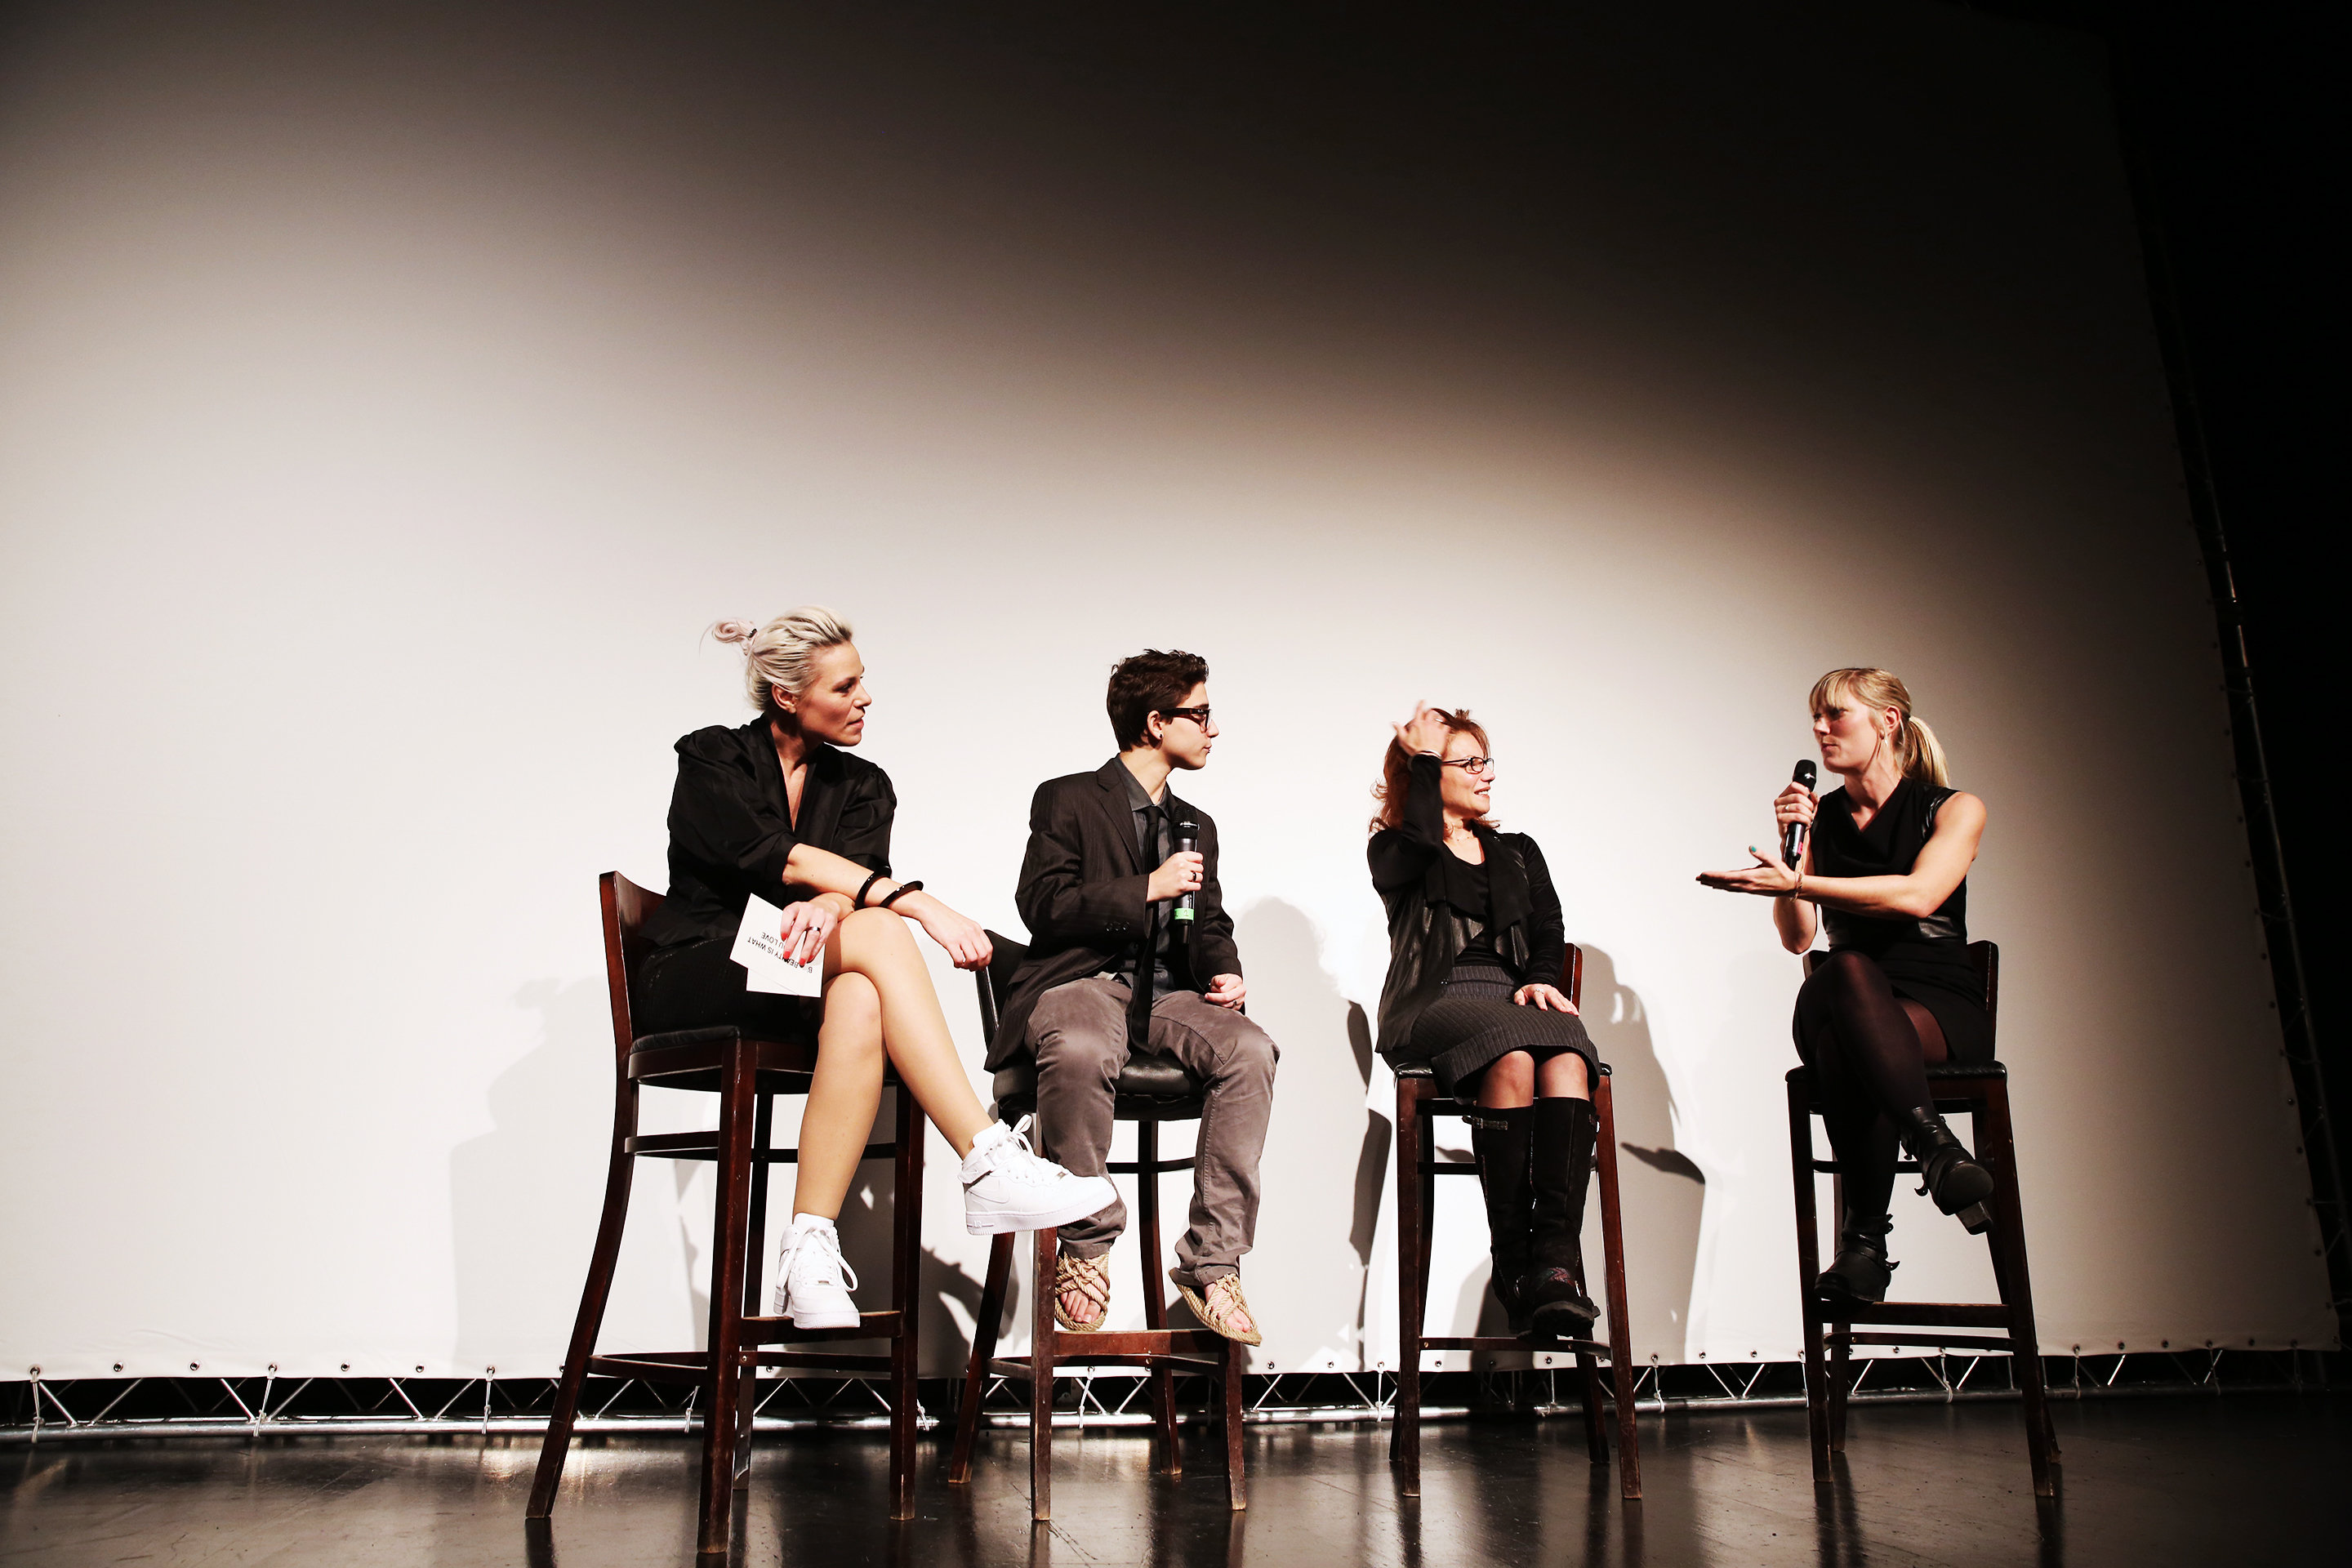 Q&A at the Danish premier at CPH:DOX 2014 with Ryan Cassata, Fran Cassata and director Elvira Lind, hosted by Mette Ohlendorff.